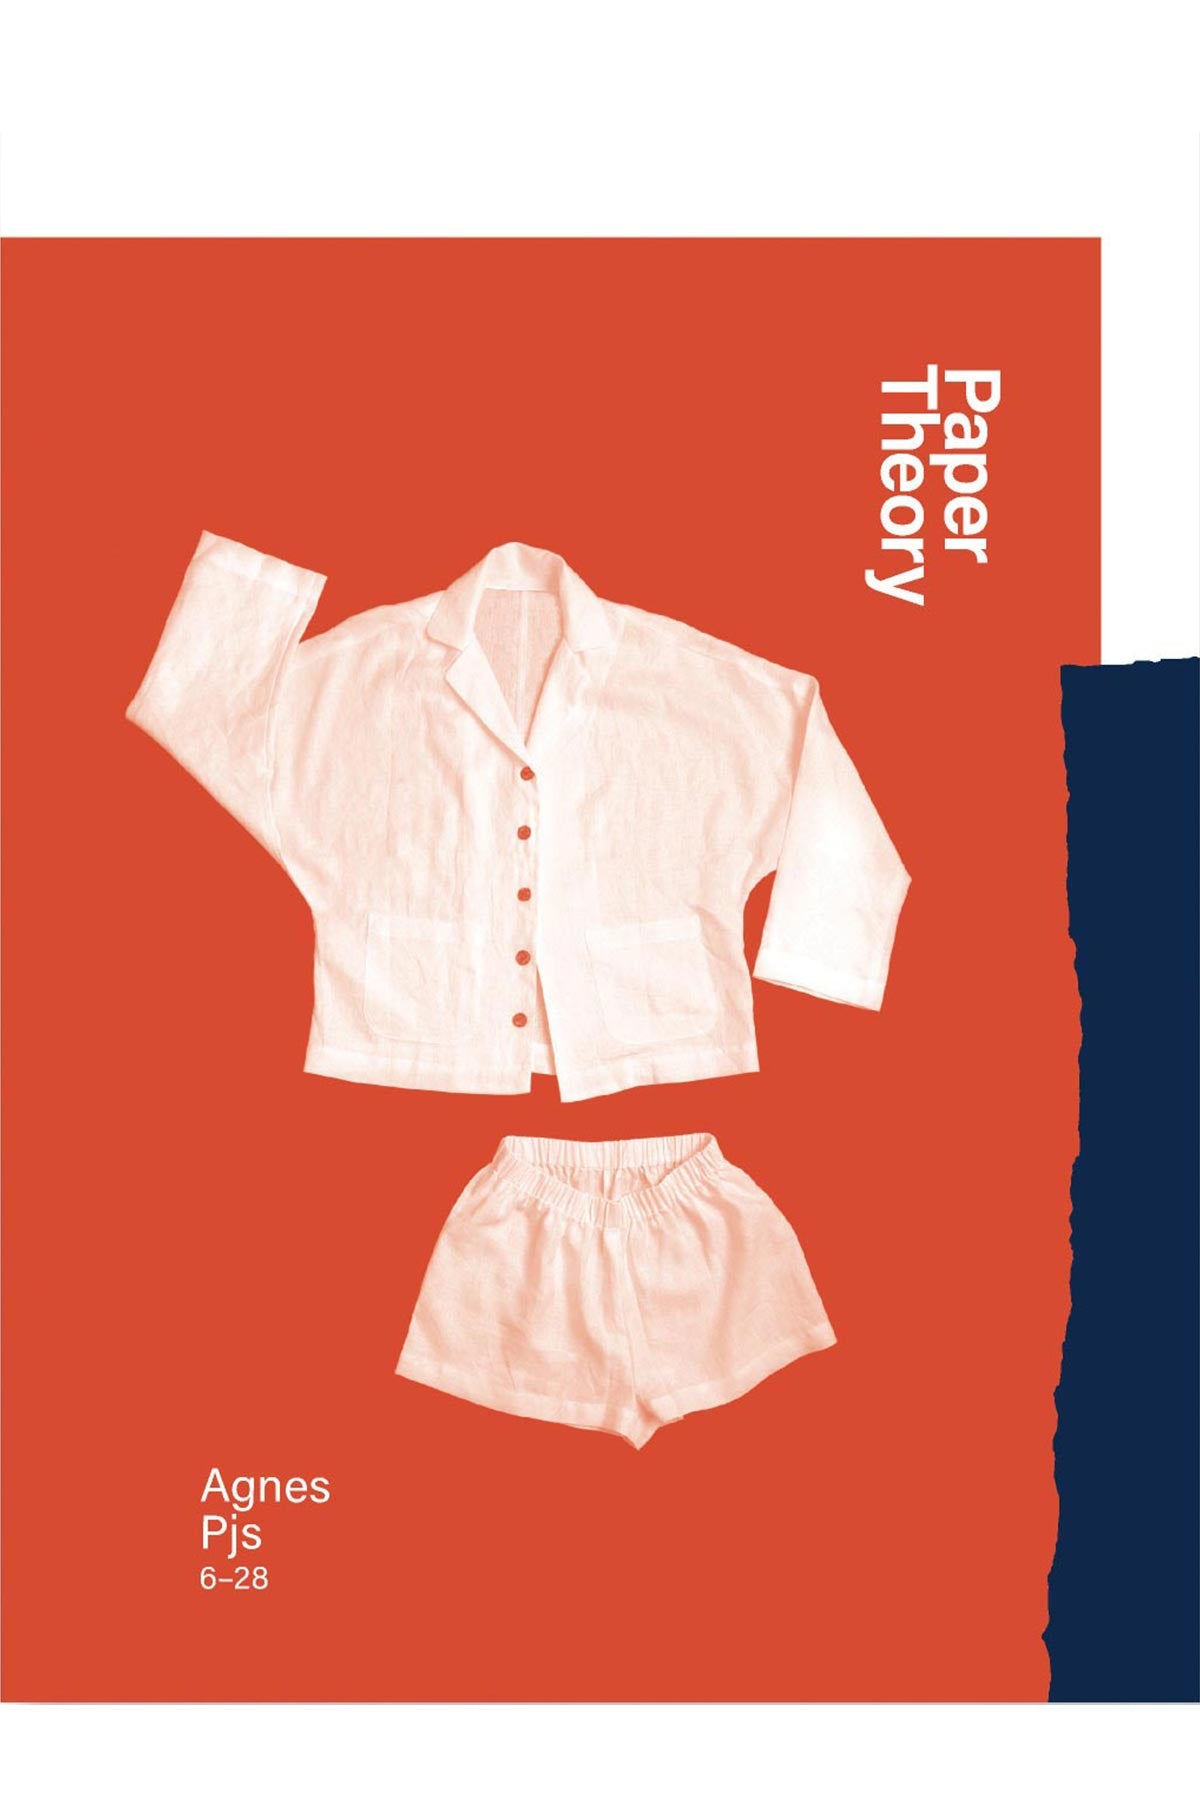 Paper Theory Agnes PJ's Sewing Pattern 6-28